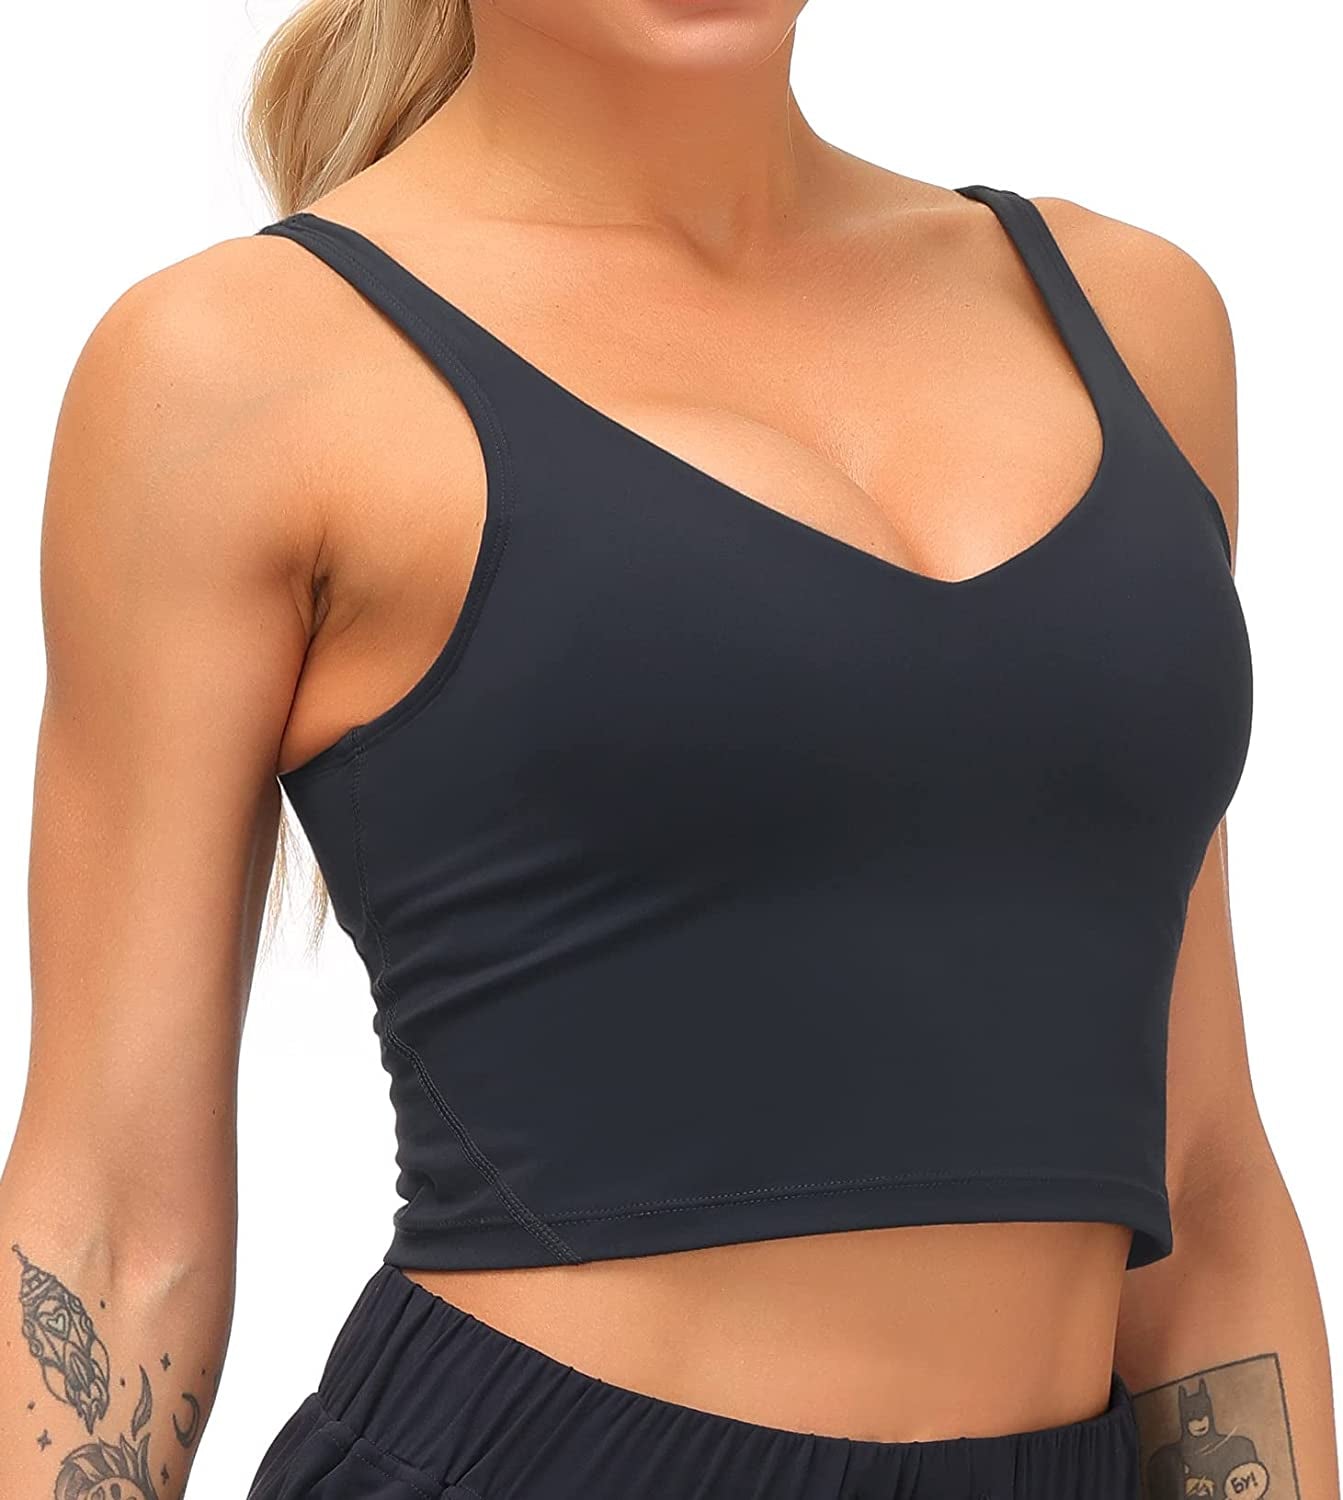 Tank Top for Women with Built in Bra Women's Padded Sports Bra Fitness  Workout Running Shirts Compression Camisole Shapewear